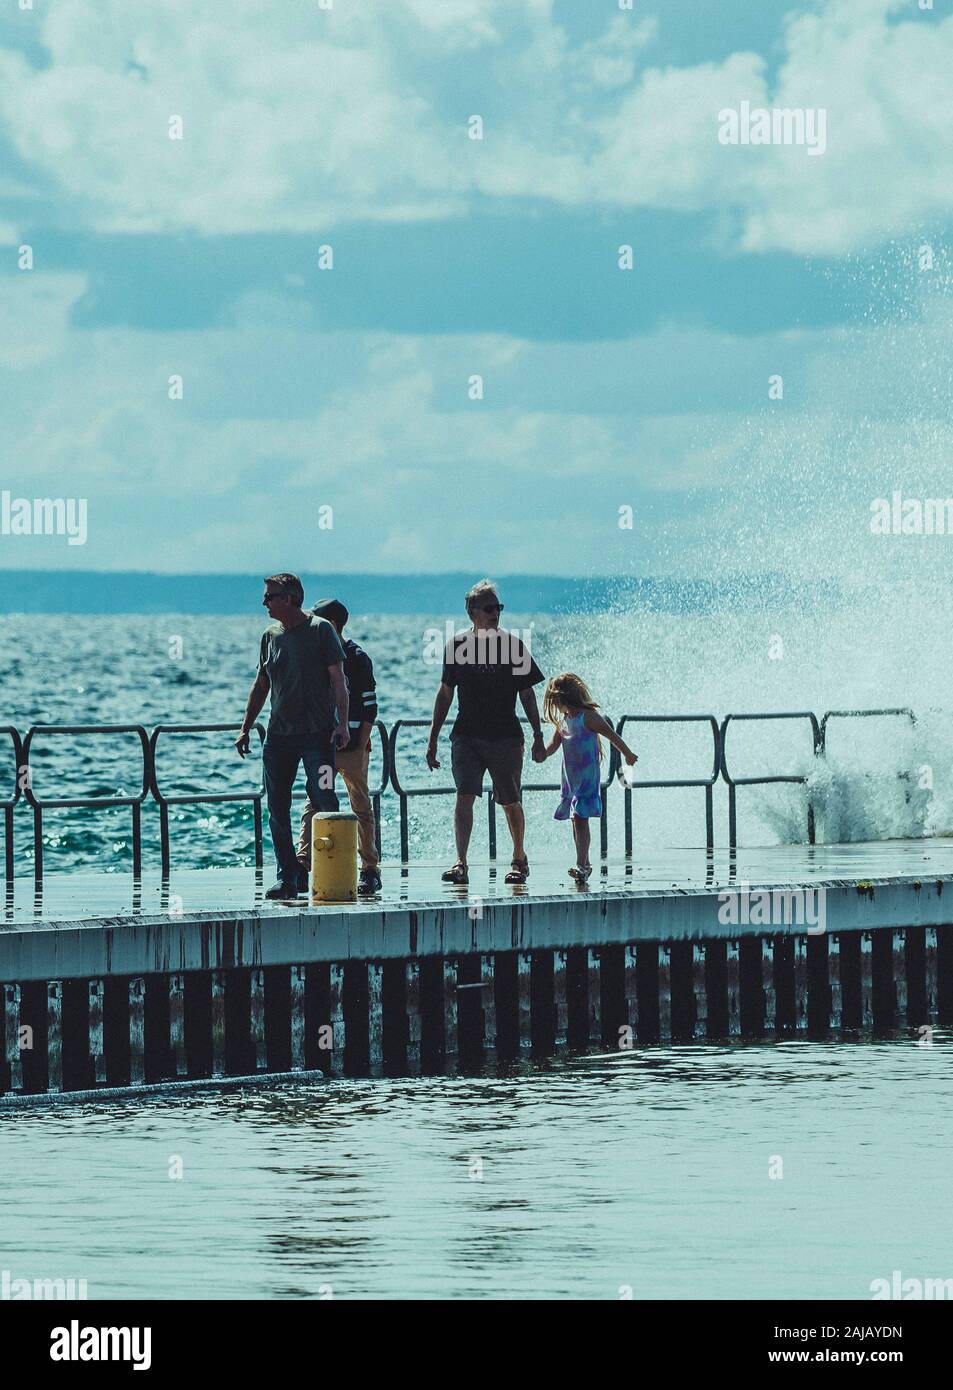 Group of people walking on a pier during the storm Stock Photo